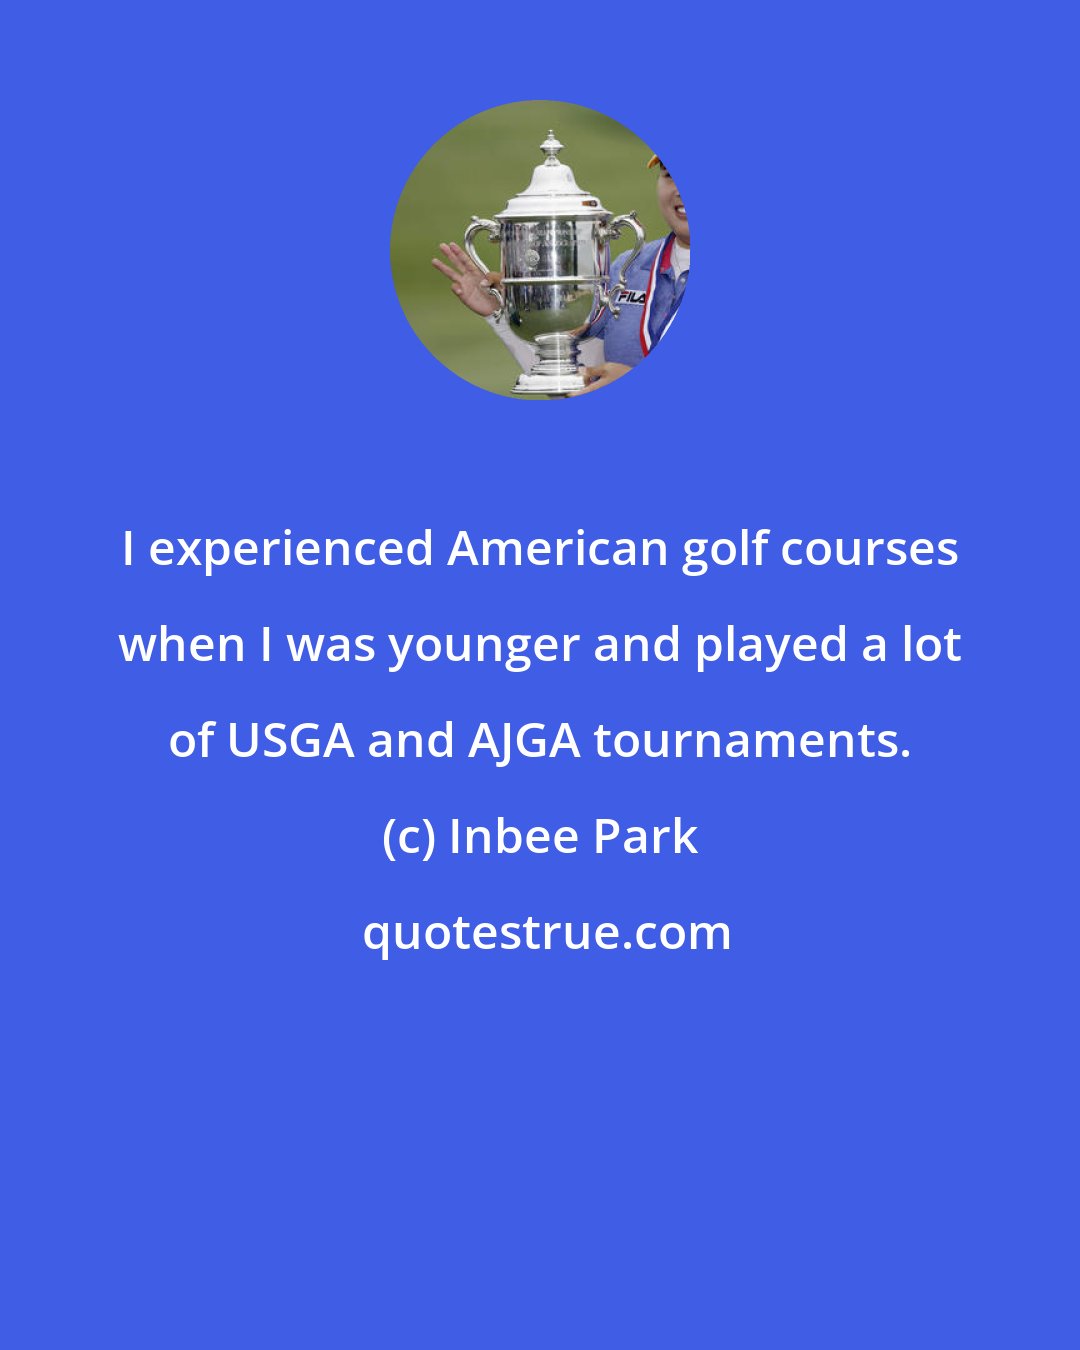 Inbee Park: I experienced American golf courses when I was younger and played a lot of USGA and AJGA tournaments.